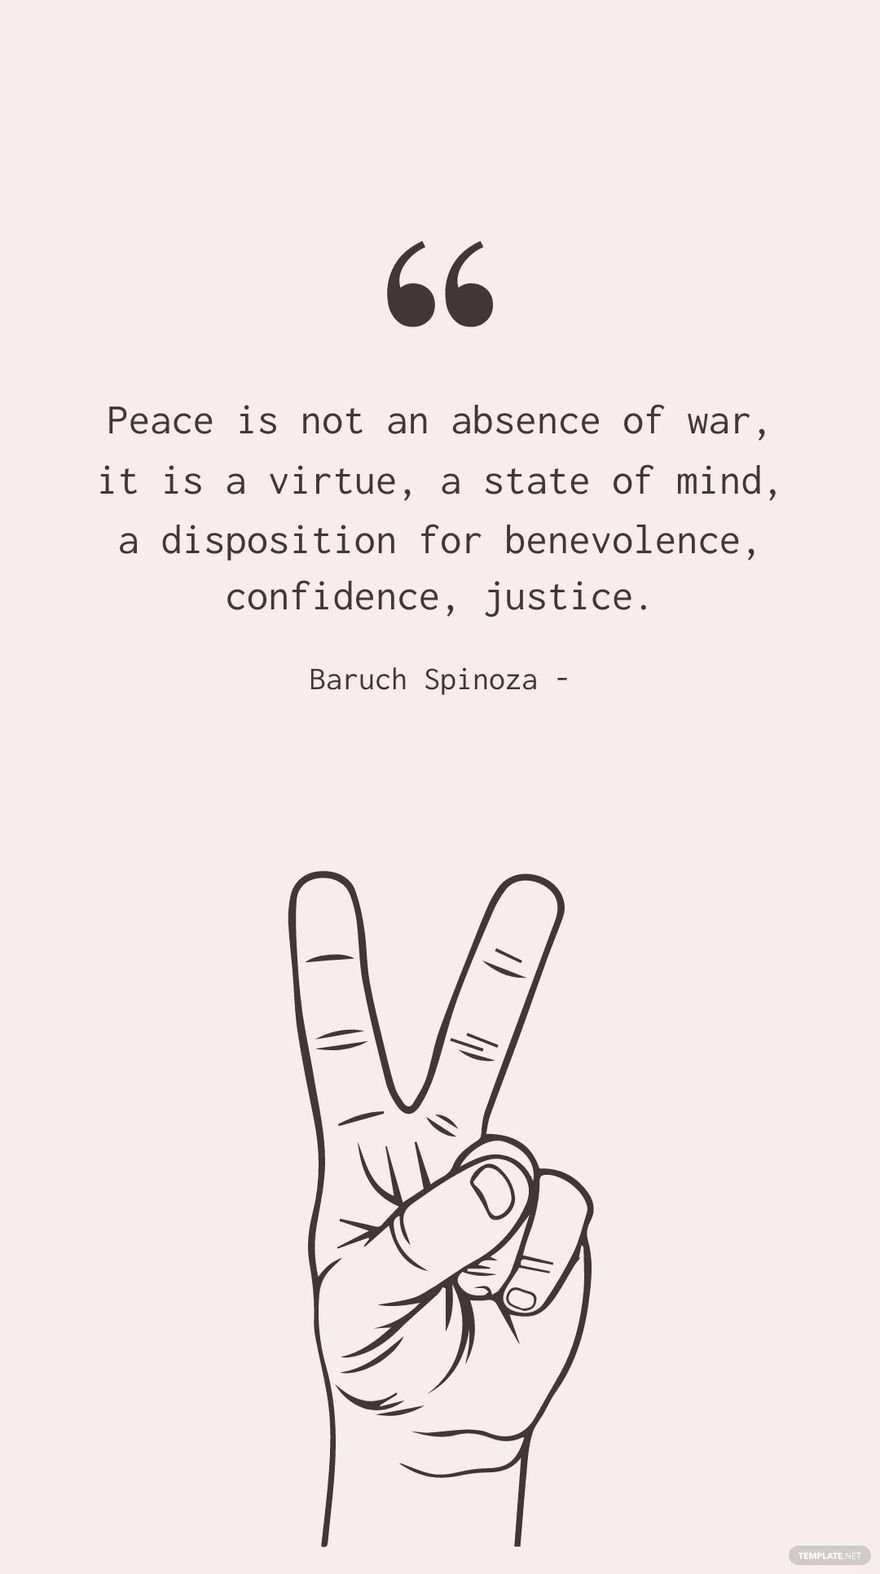 Baruch Spinoza - Peace is not an absence of war, it is a virtue, a state of mind, a disposition for benevolence, confidence, justice. in JPG